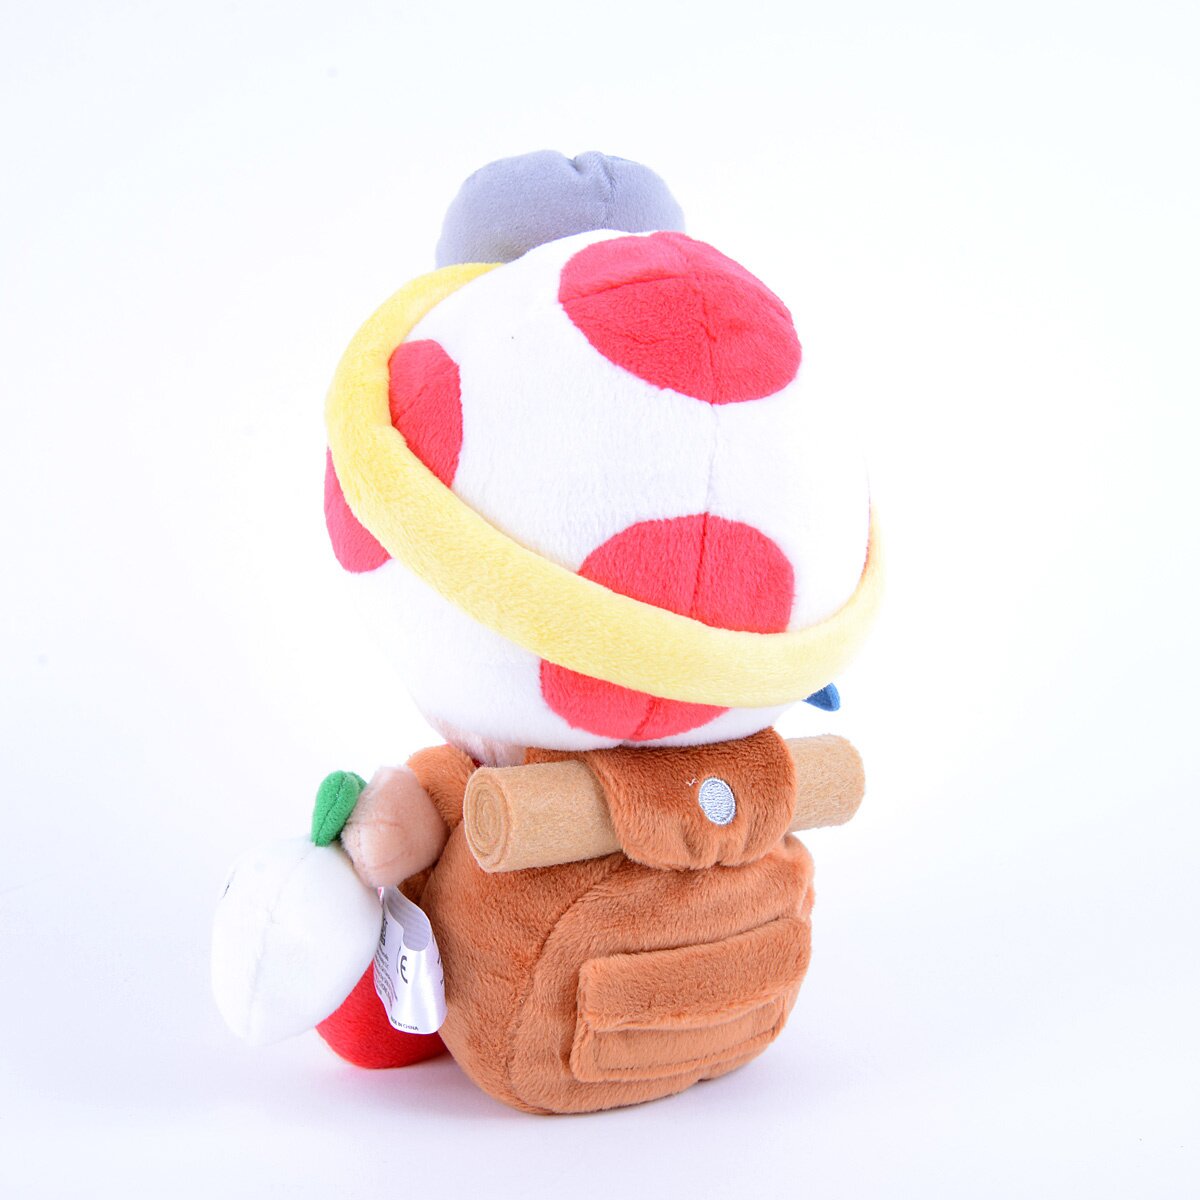  Little Buddy Super Mario Bros. Captain Toad Standing Pose Stuffed  Plush, 9, Multi-Colored (1409) : Toys & Games